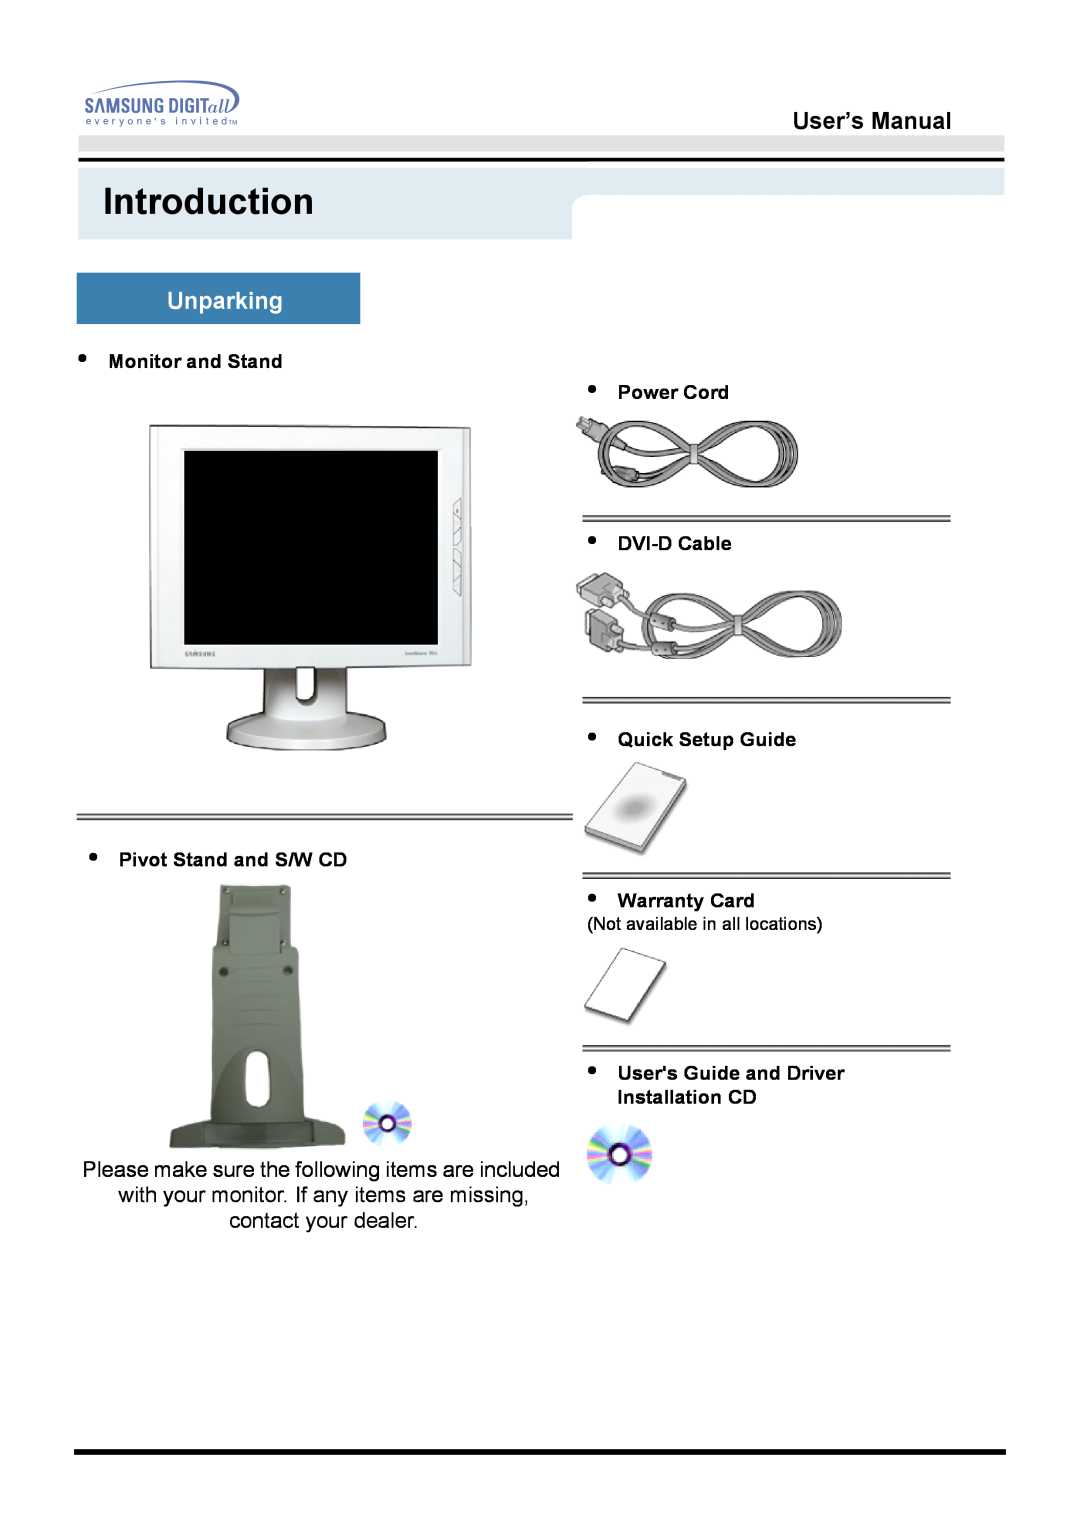 Samsung 151D user manual Introduction, Unparking, User’s Manual, Monitor and Stand Power Cord, Pivot Stand and S/W CD 